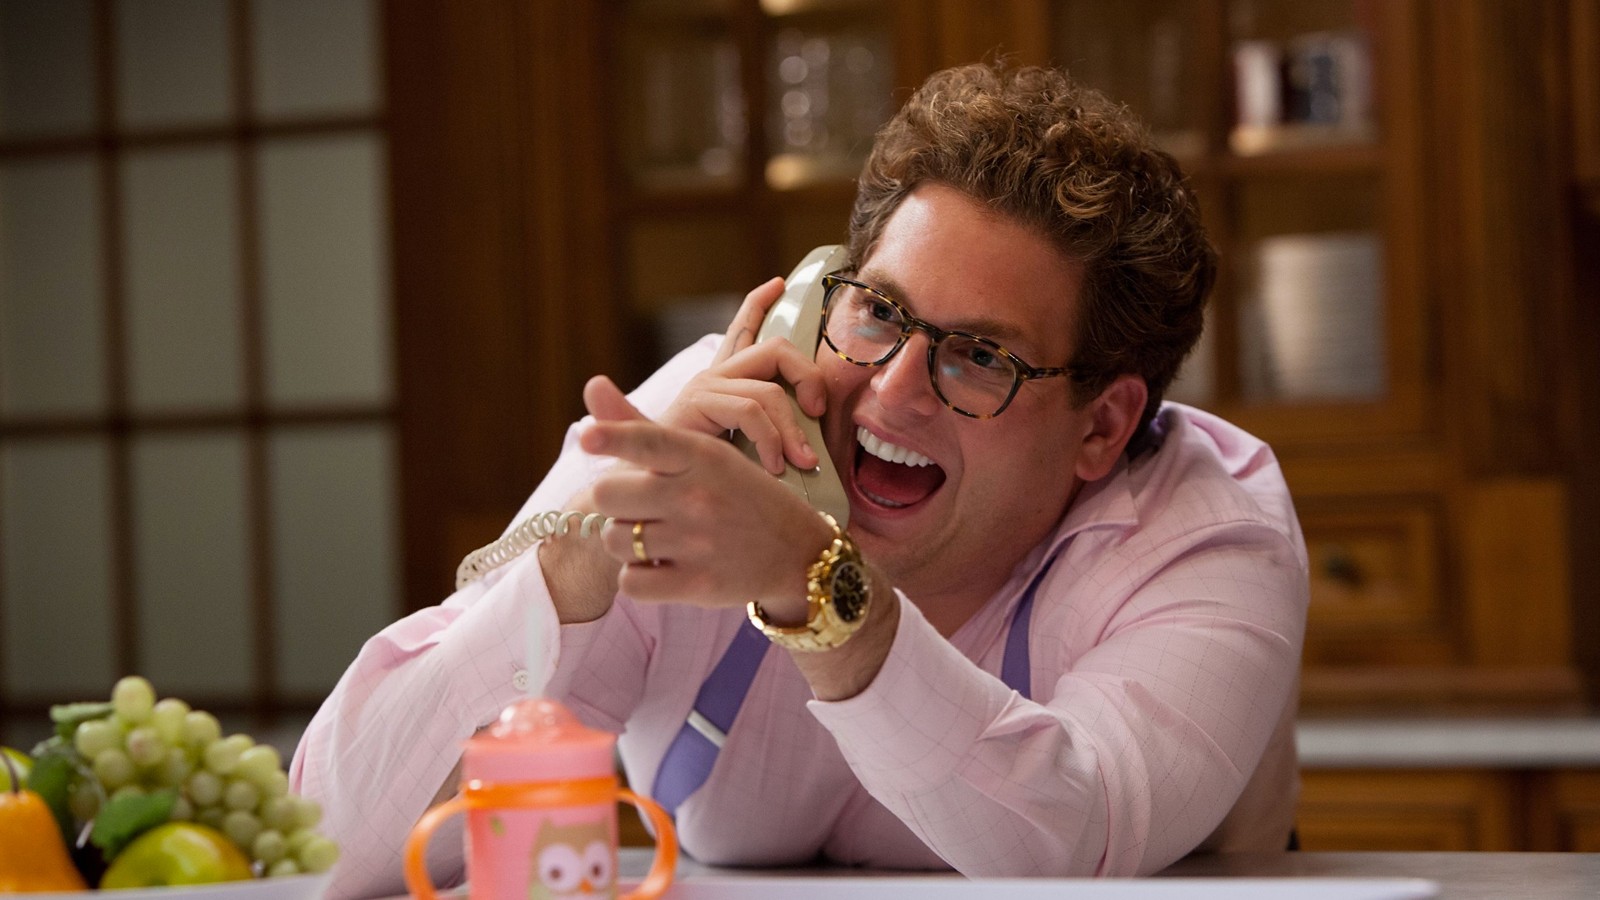 Jonah Hill in The Wolf of Wall Street